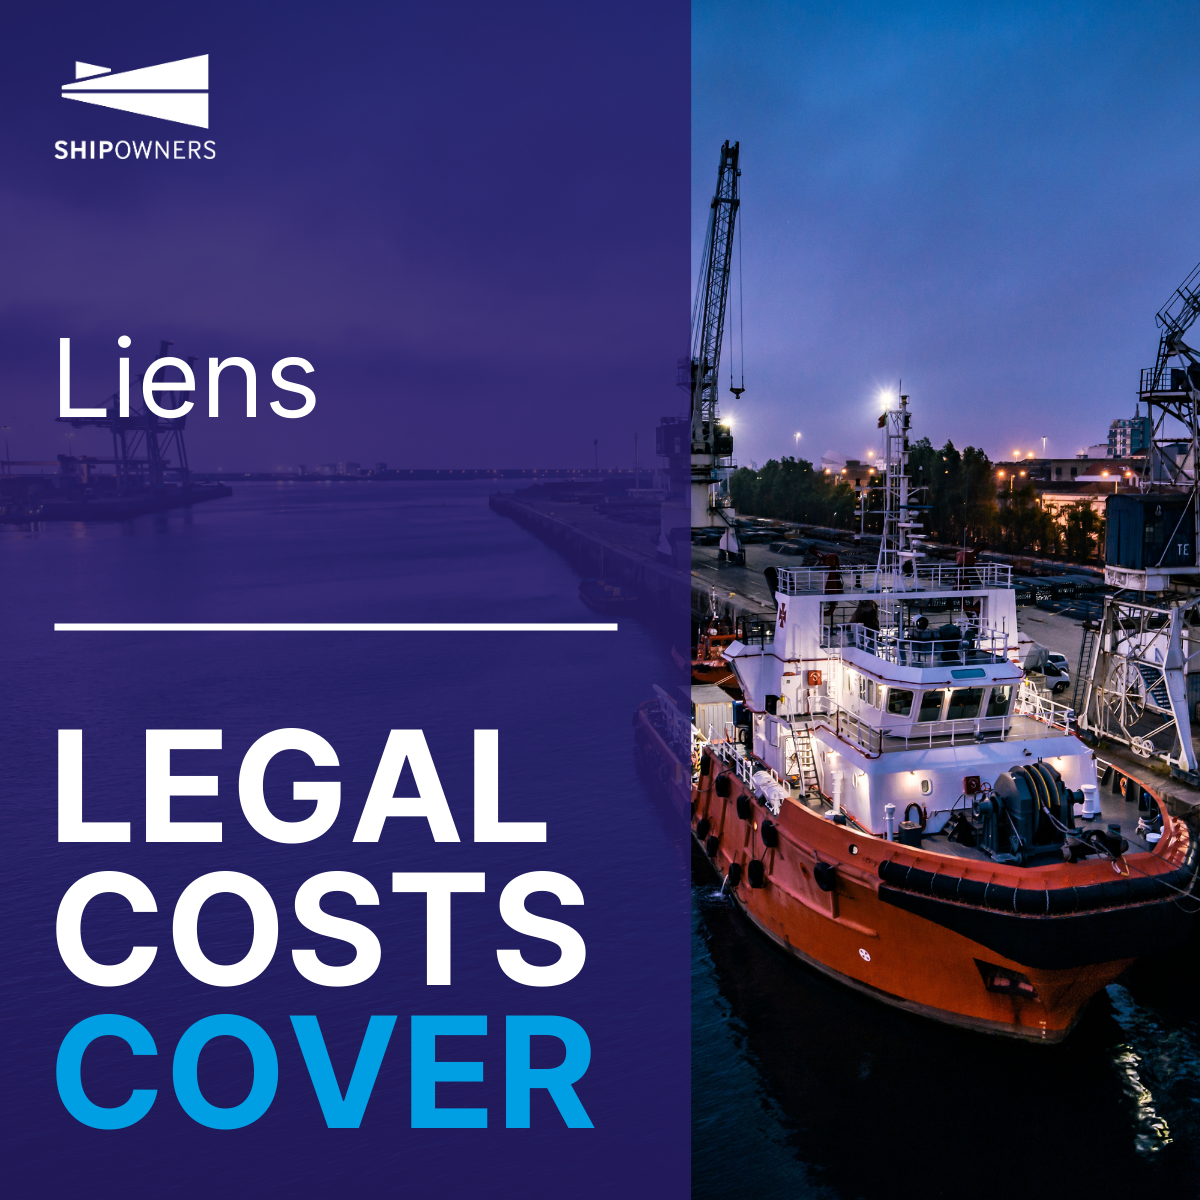 Copy of LEGAL COSTS COVER Liens.png